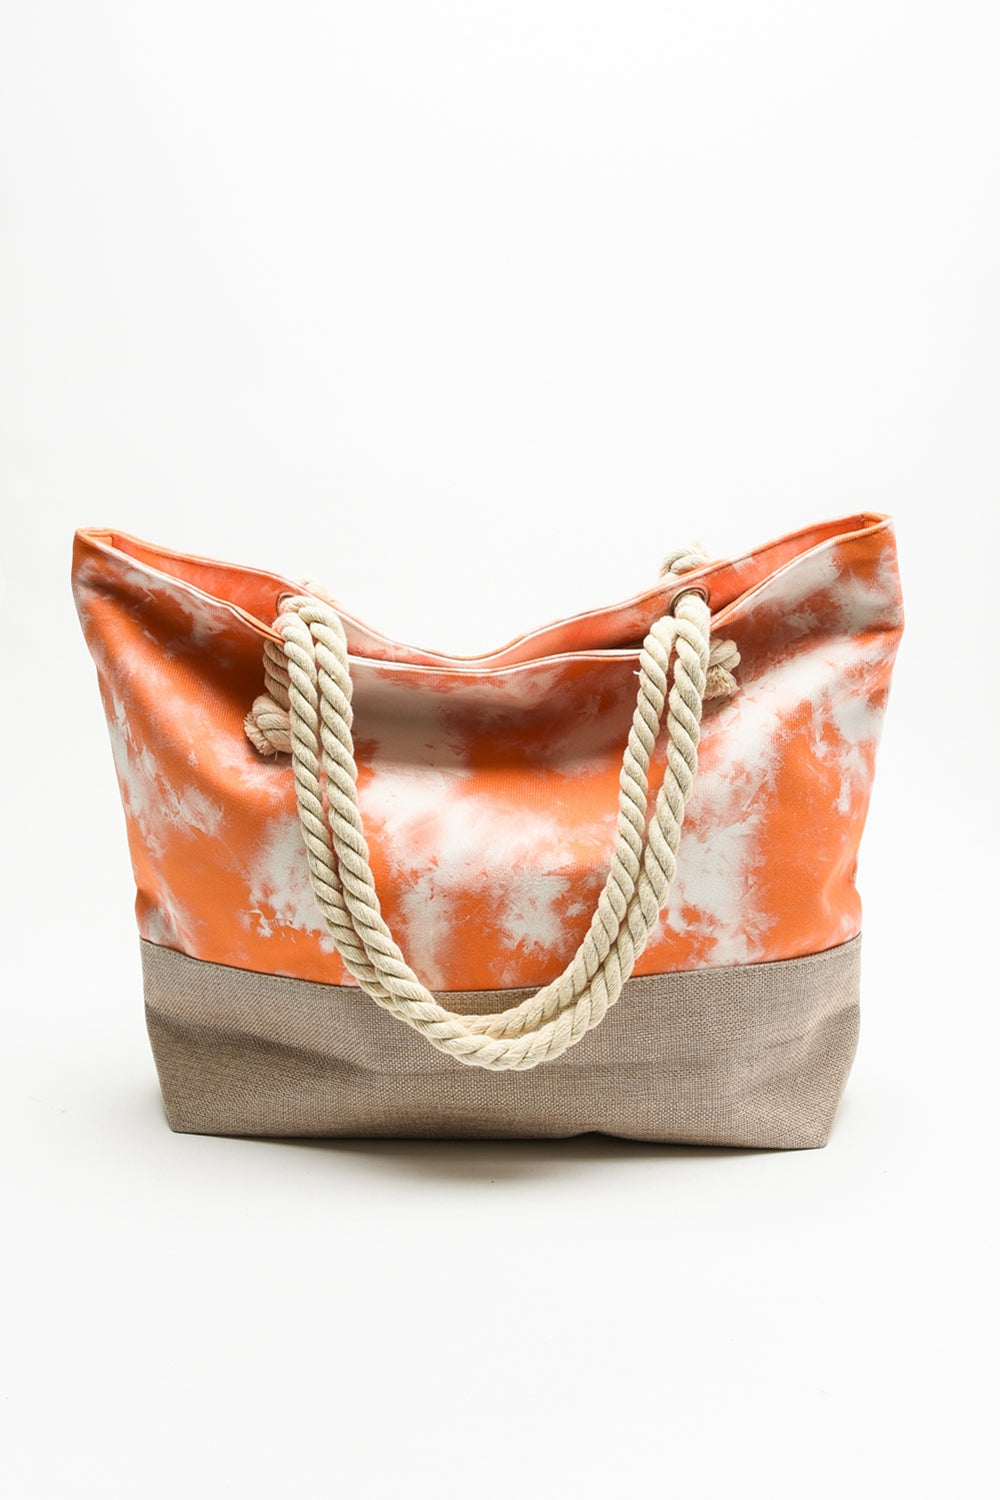 Justin Taylor Tie-Dye Tote with Rope Handles | Tote Bags - CHANELIA